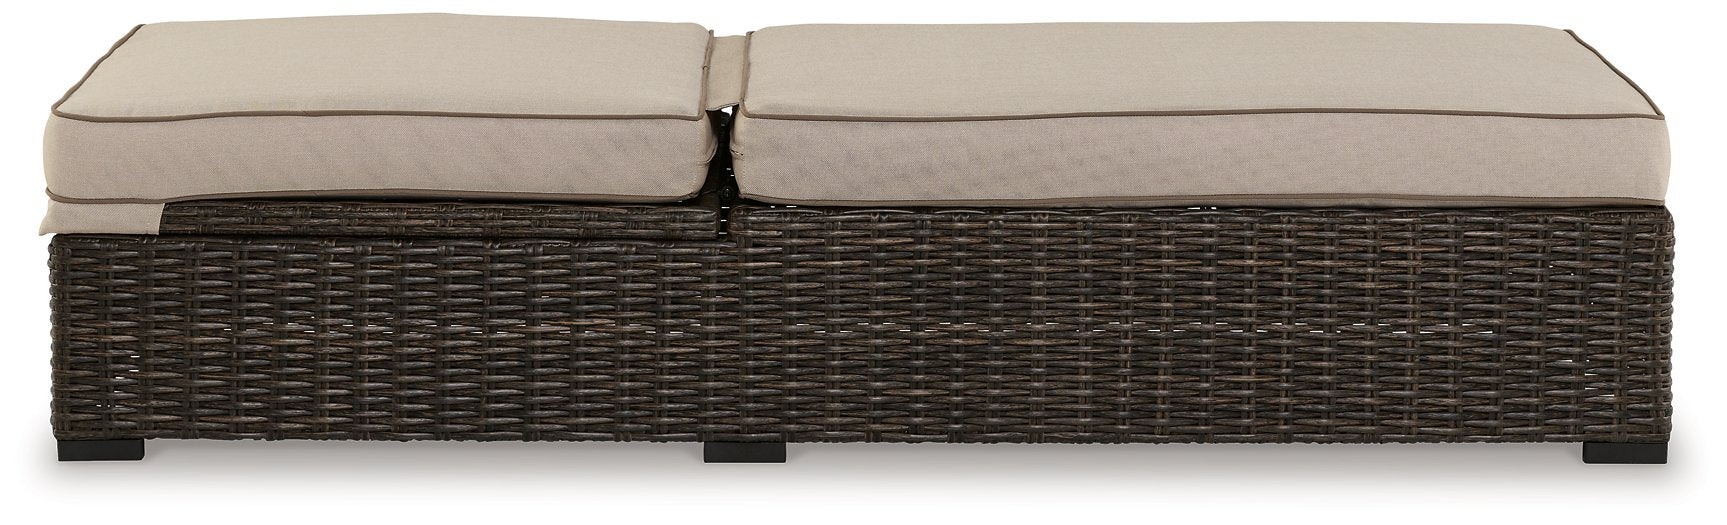 Coastline Bay Outdoor Chaise Lounge with Cushion - Affordable Home Luxury